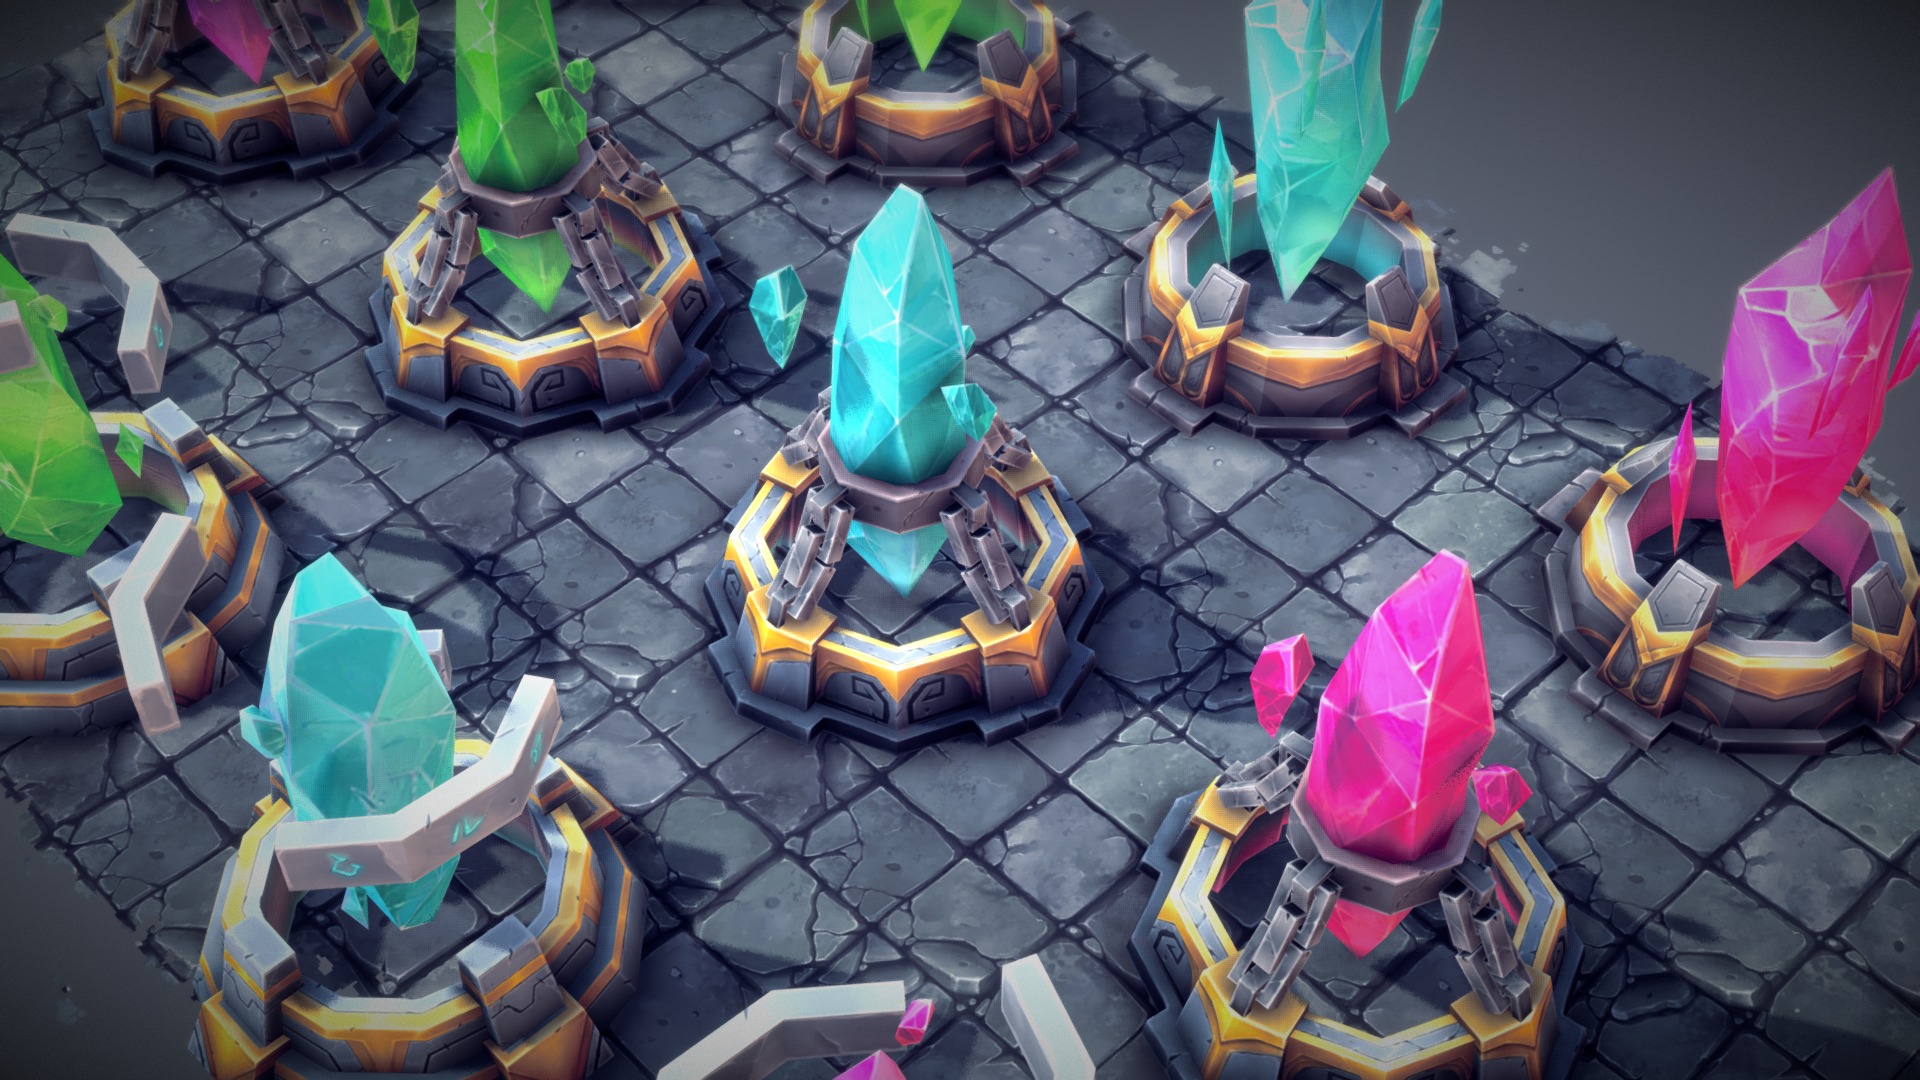 3D model Fantasy Nexus - This is a 3D model of the Fantasy Nexus. The 3D model is about a group of colorful chairs.